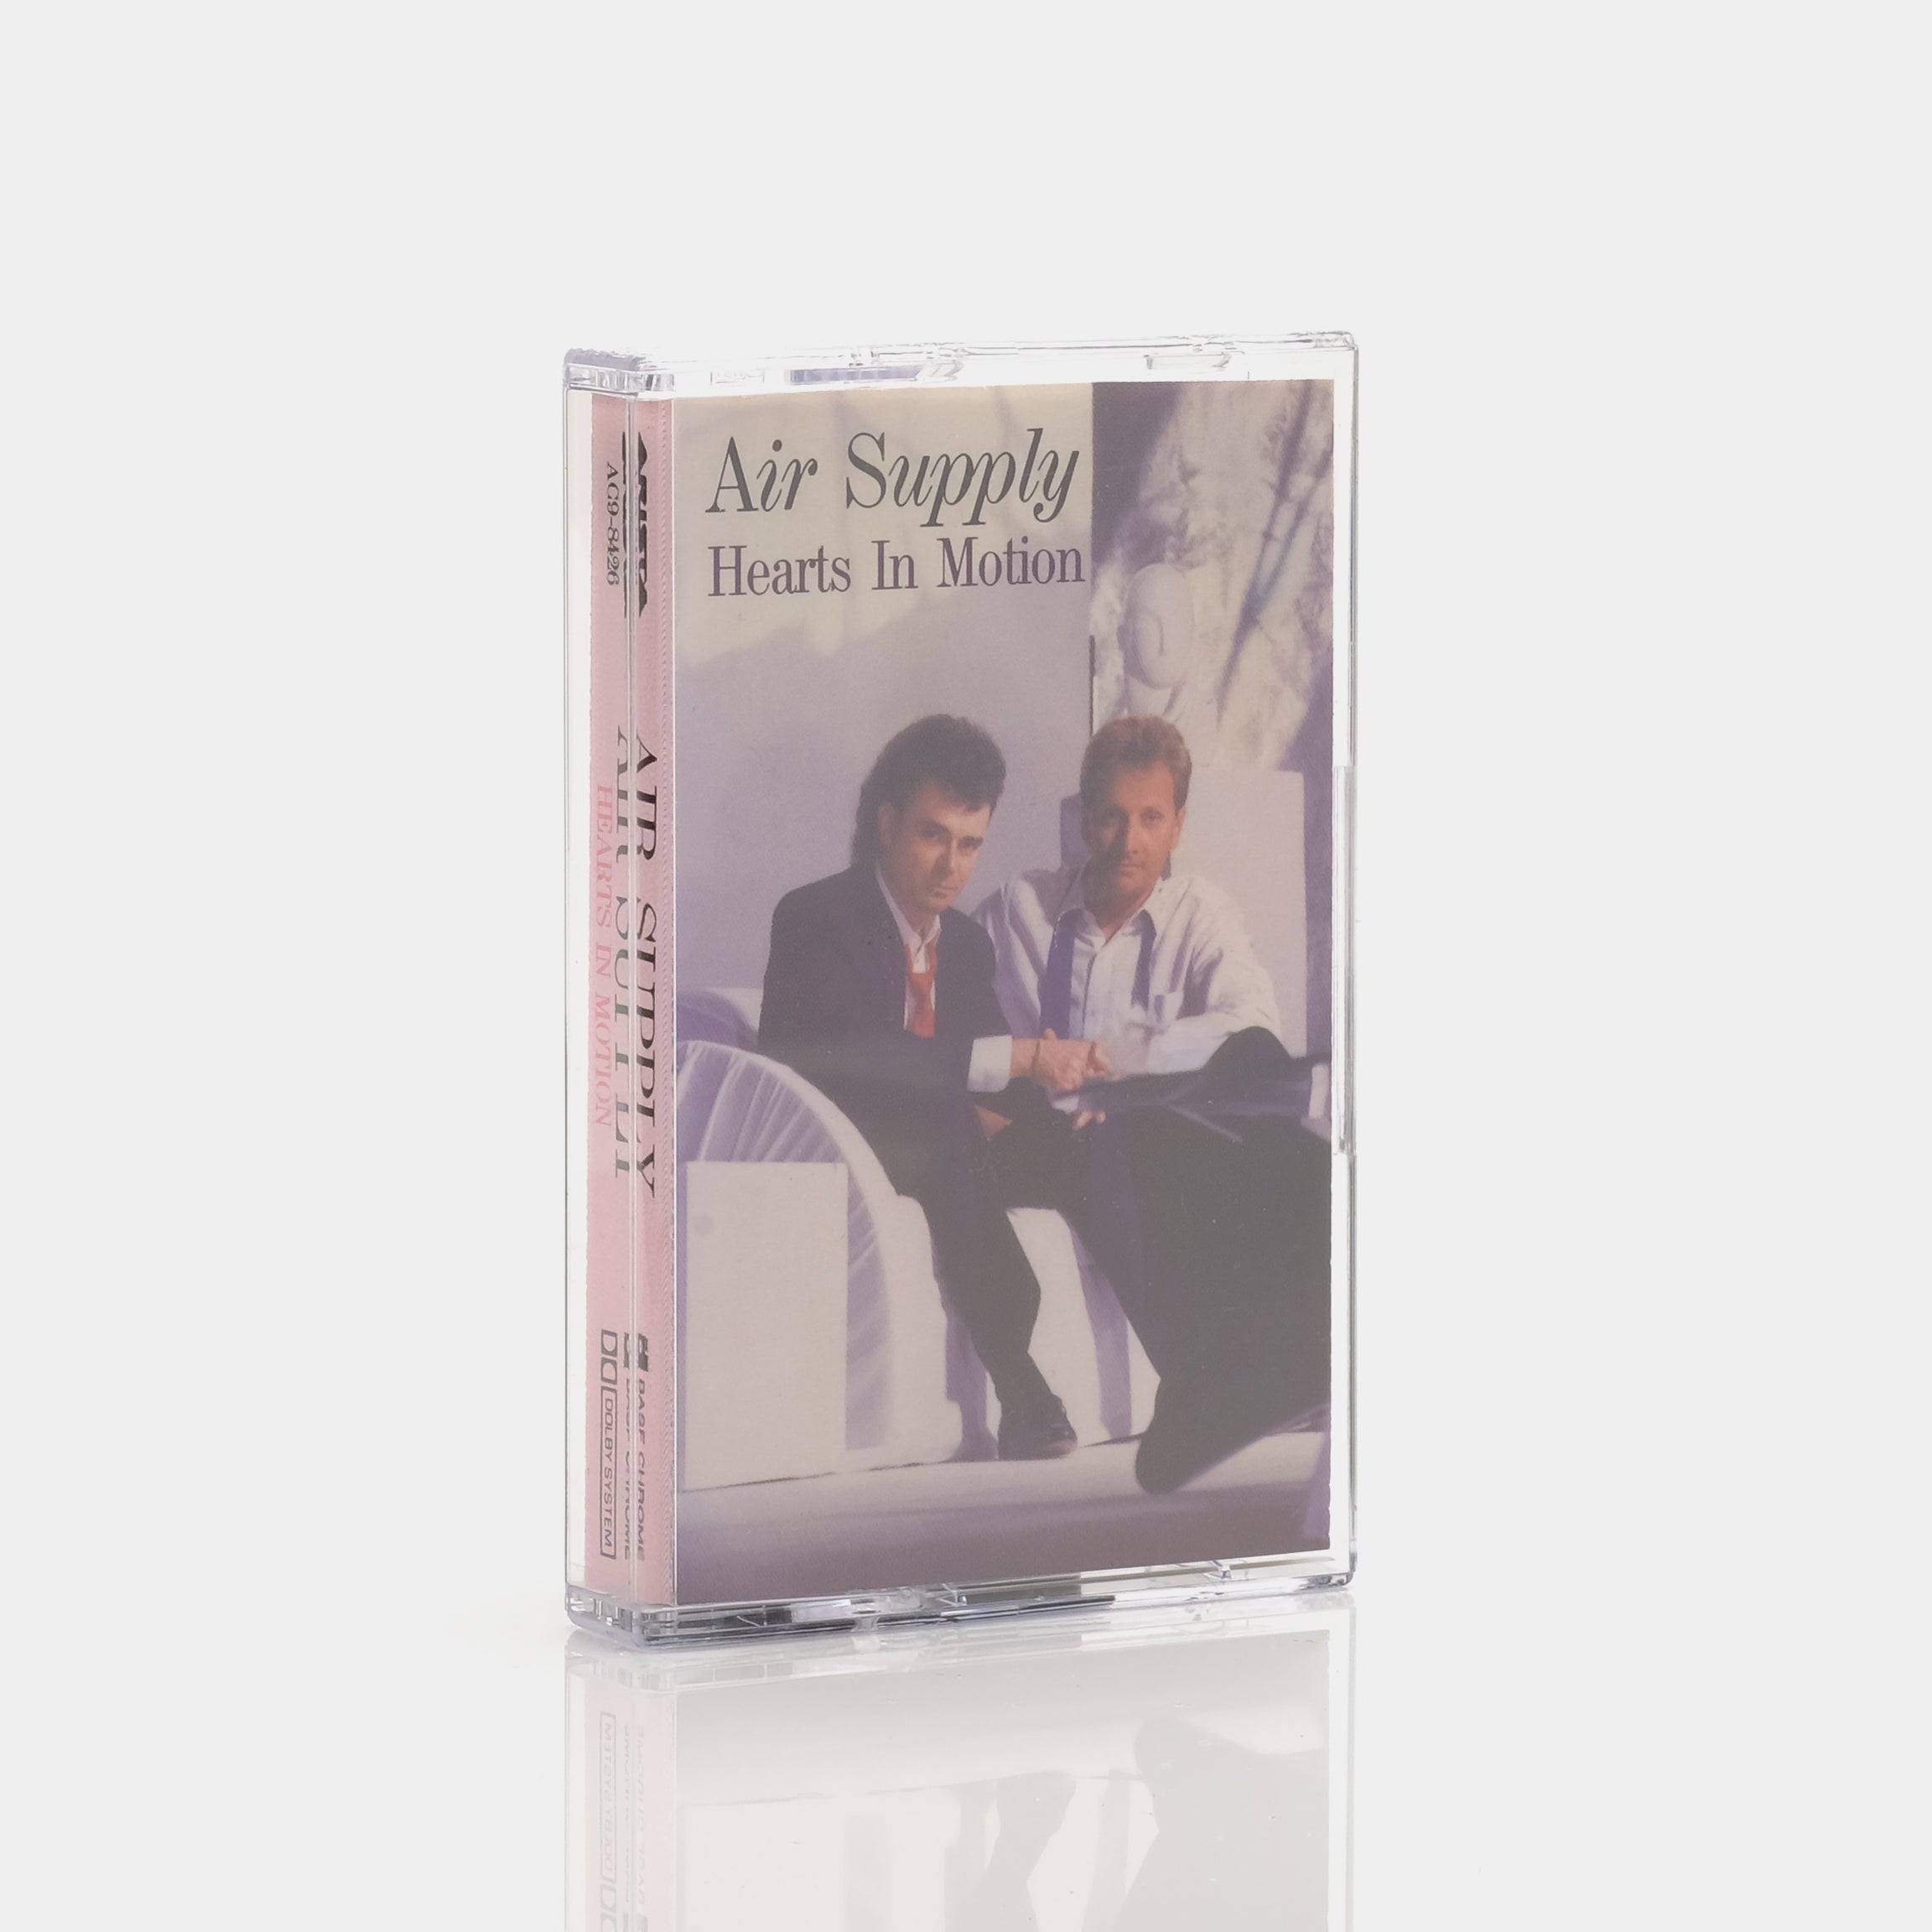 Air Supply - Hearts In Motion Cassette Tape